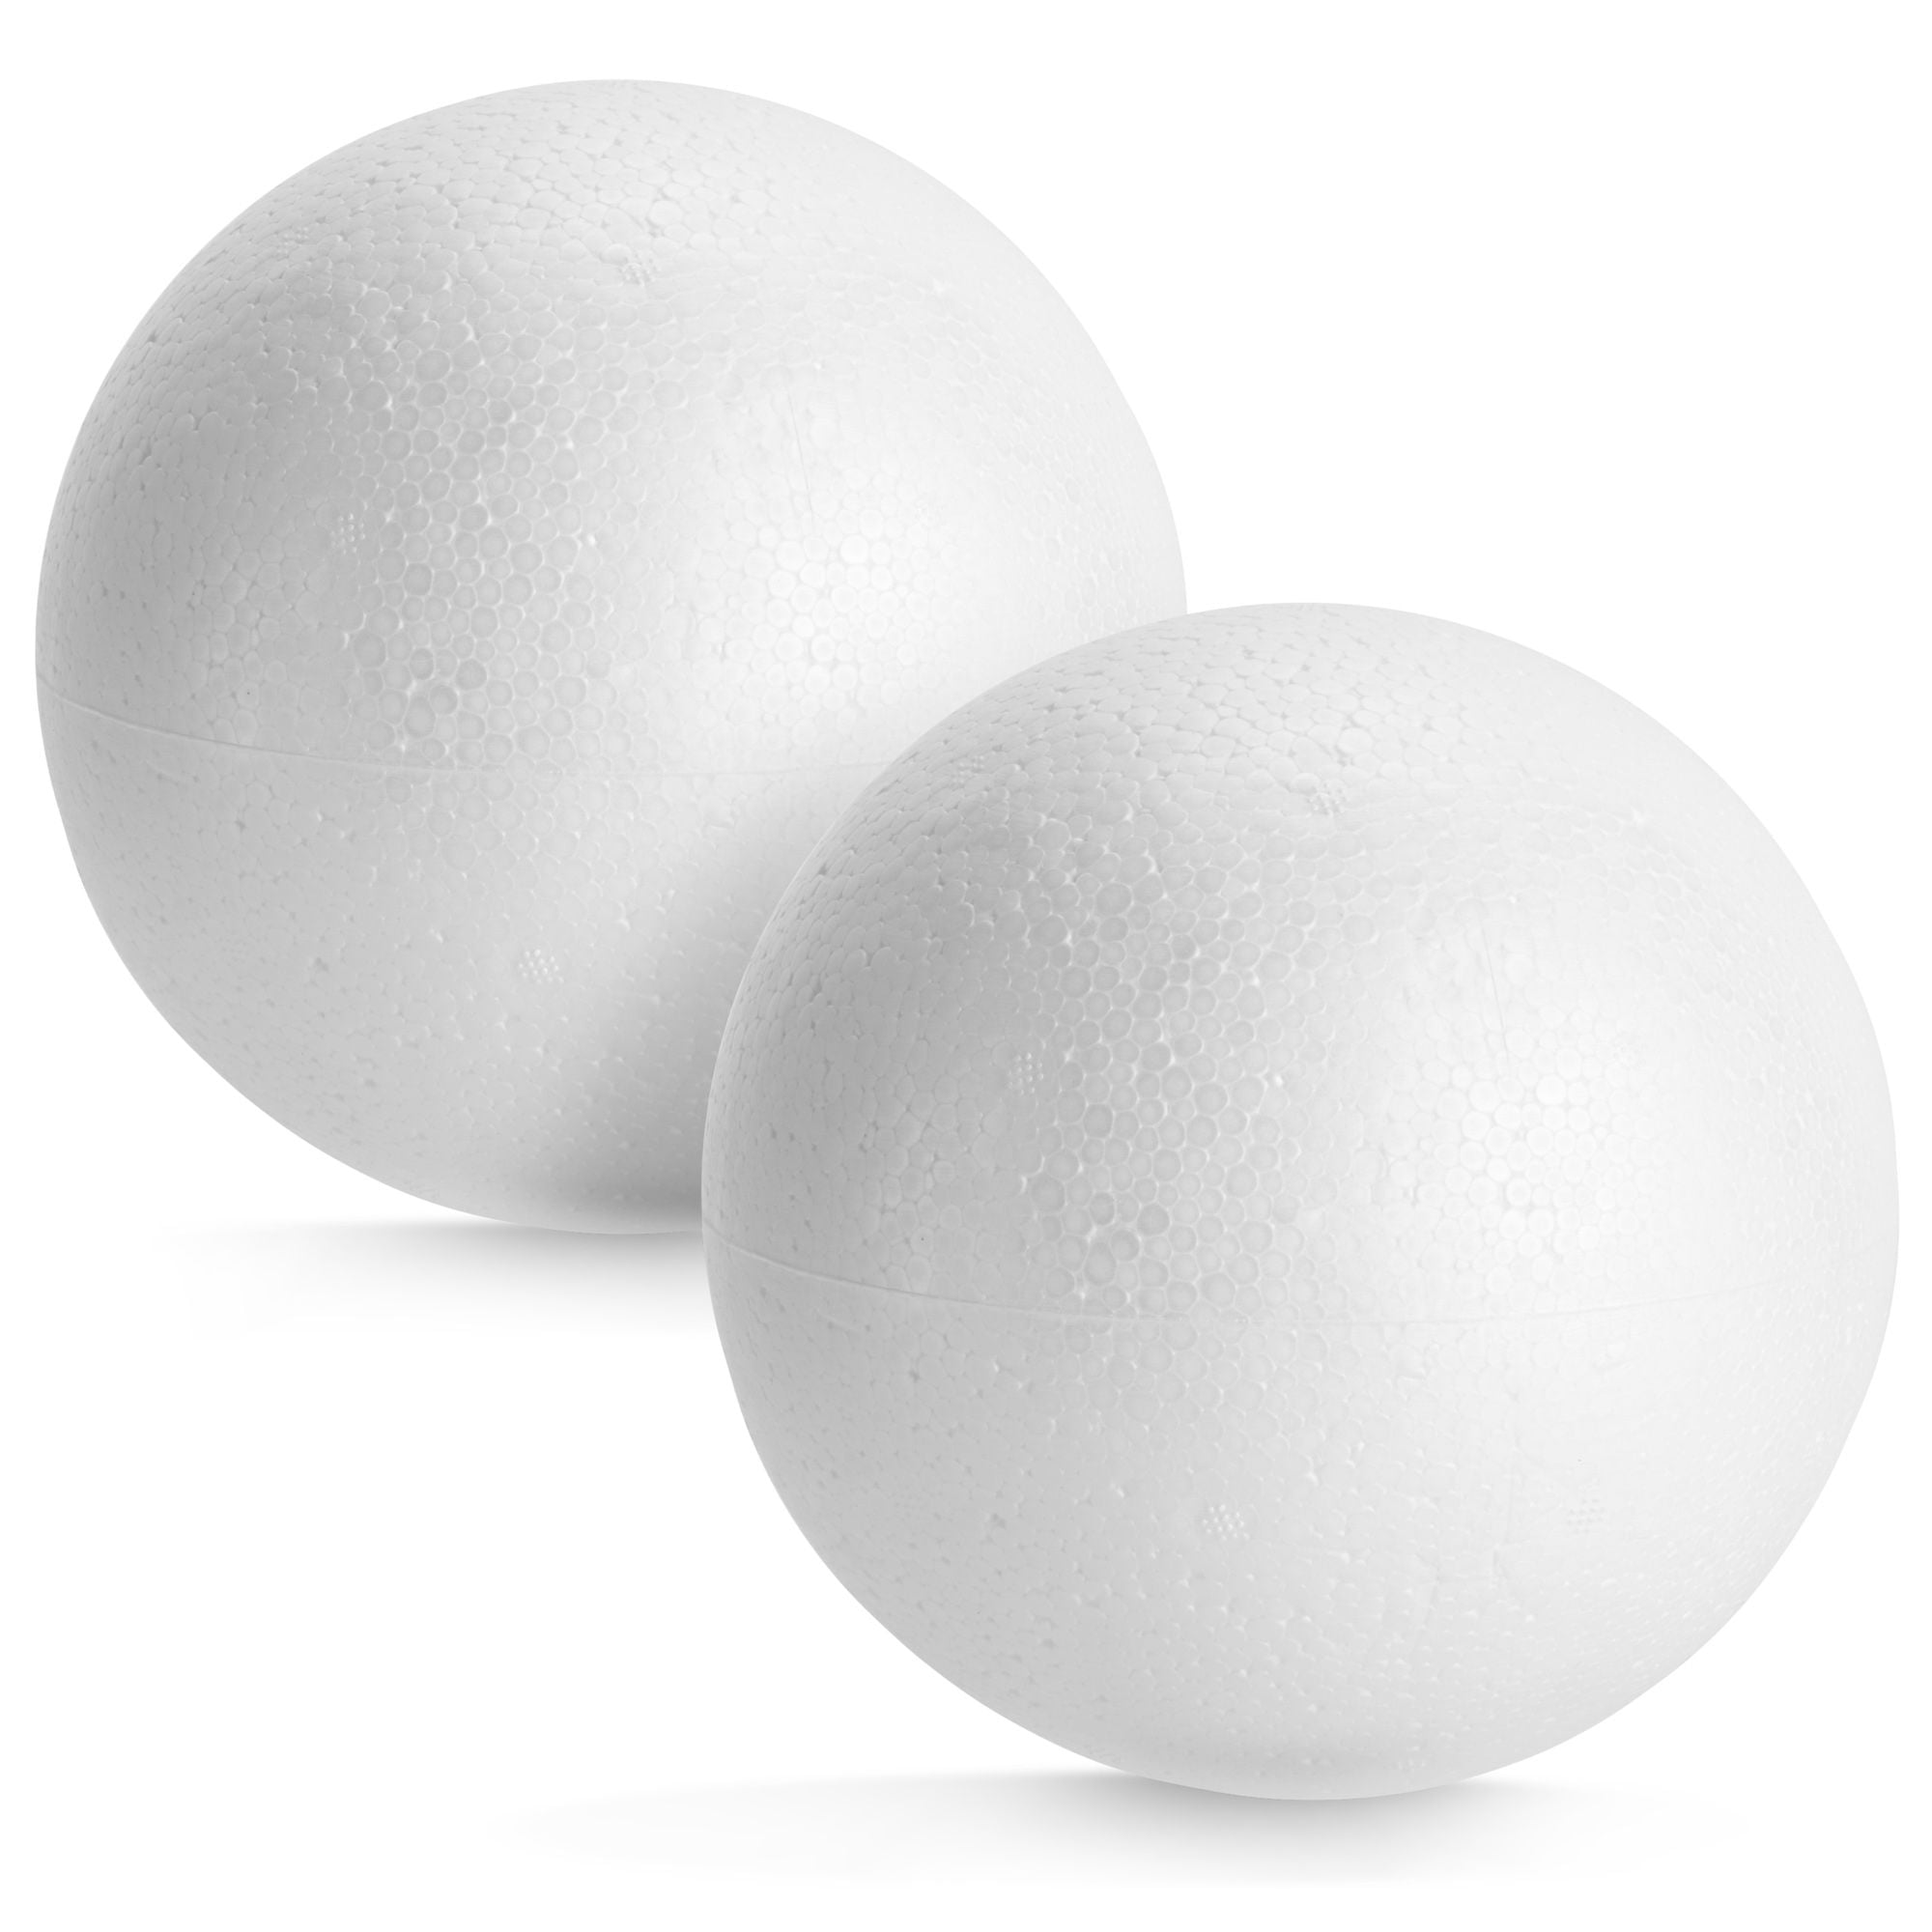 Crafjie 8 inch 2pcs Giant Styrofoam Balls Smooth Large White Foam Balls Solid Craft Balls for Christmas DIY Ornaments and School Projects and Modeling